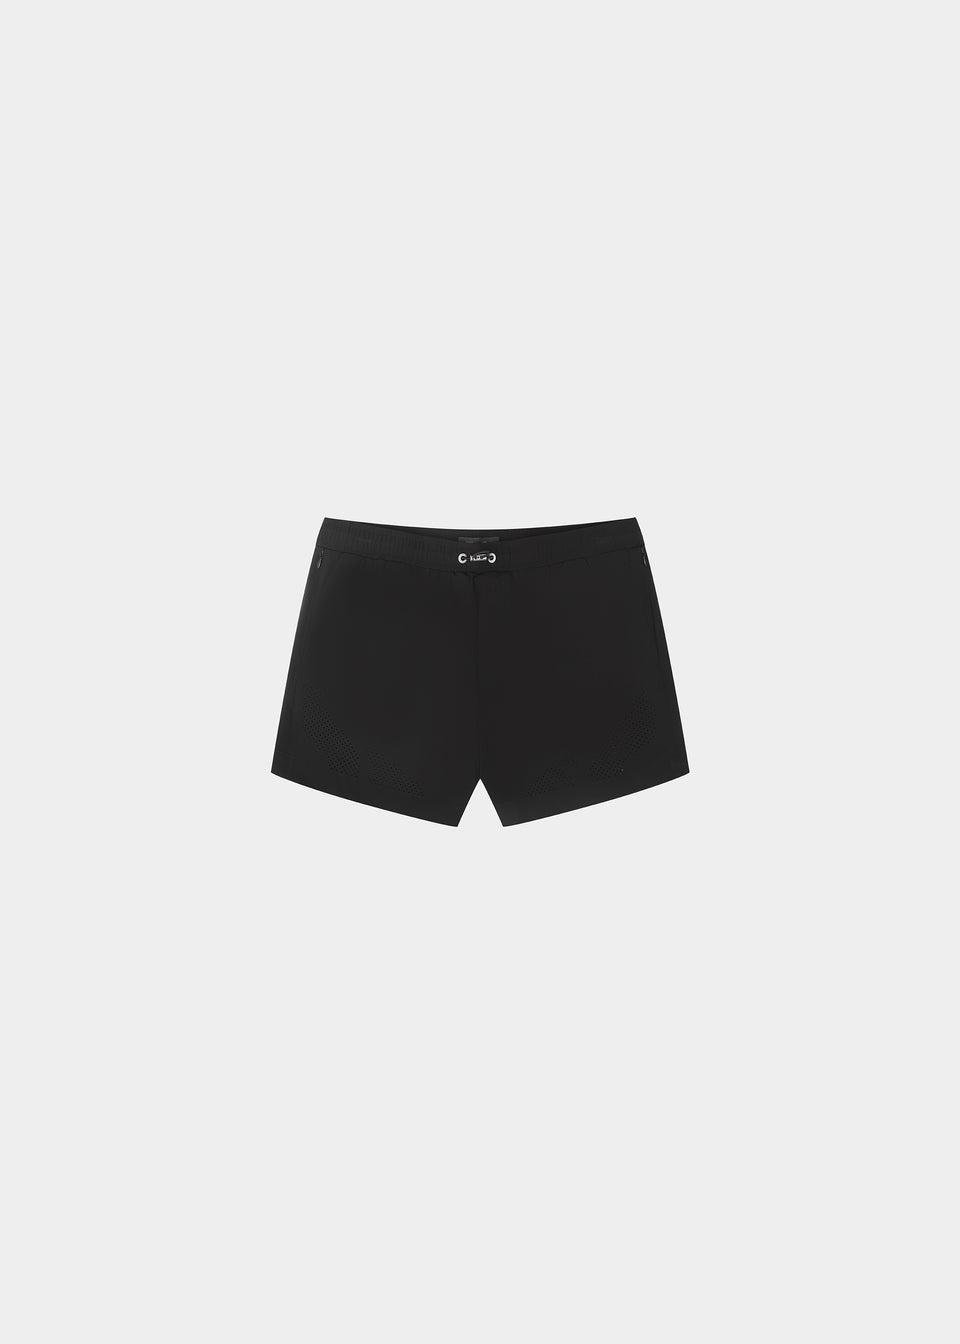 INTINE SWIMSHORTS by HELIOT EMIL